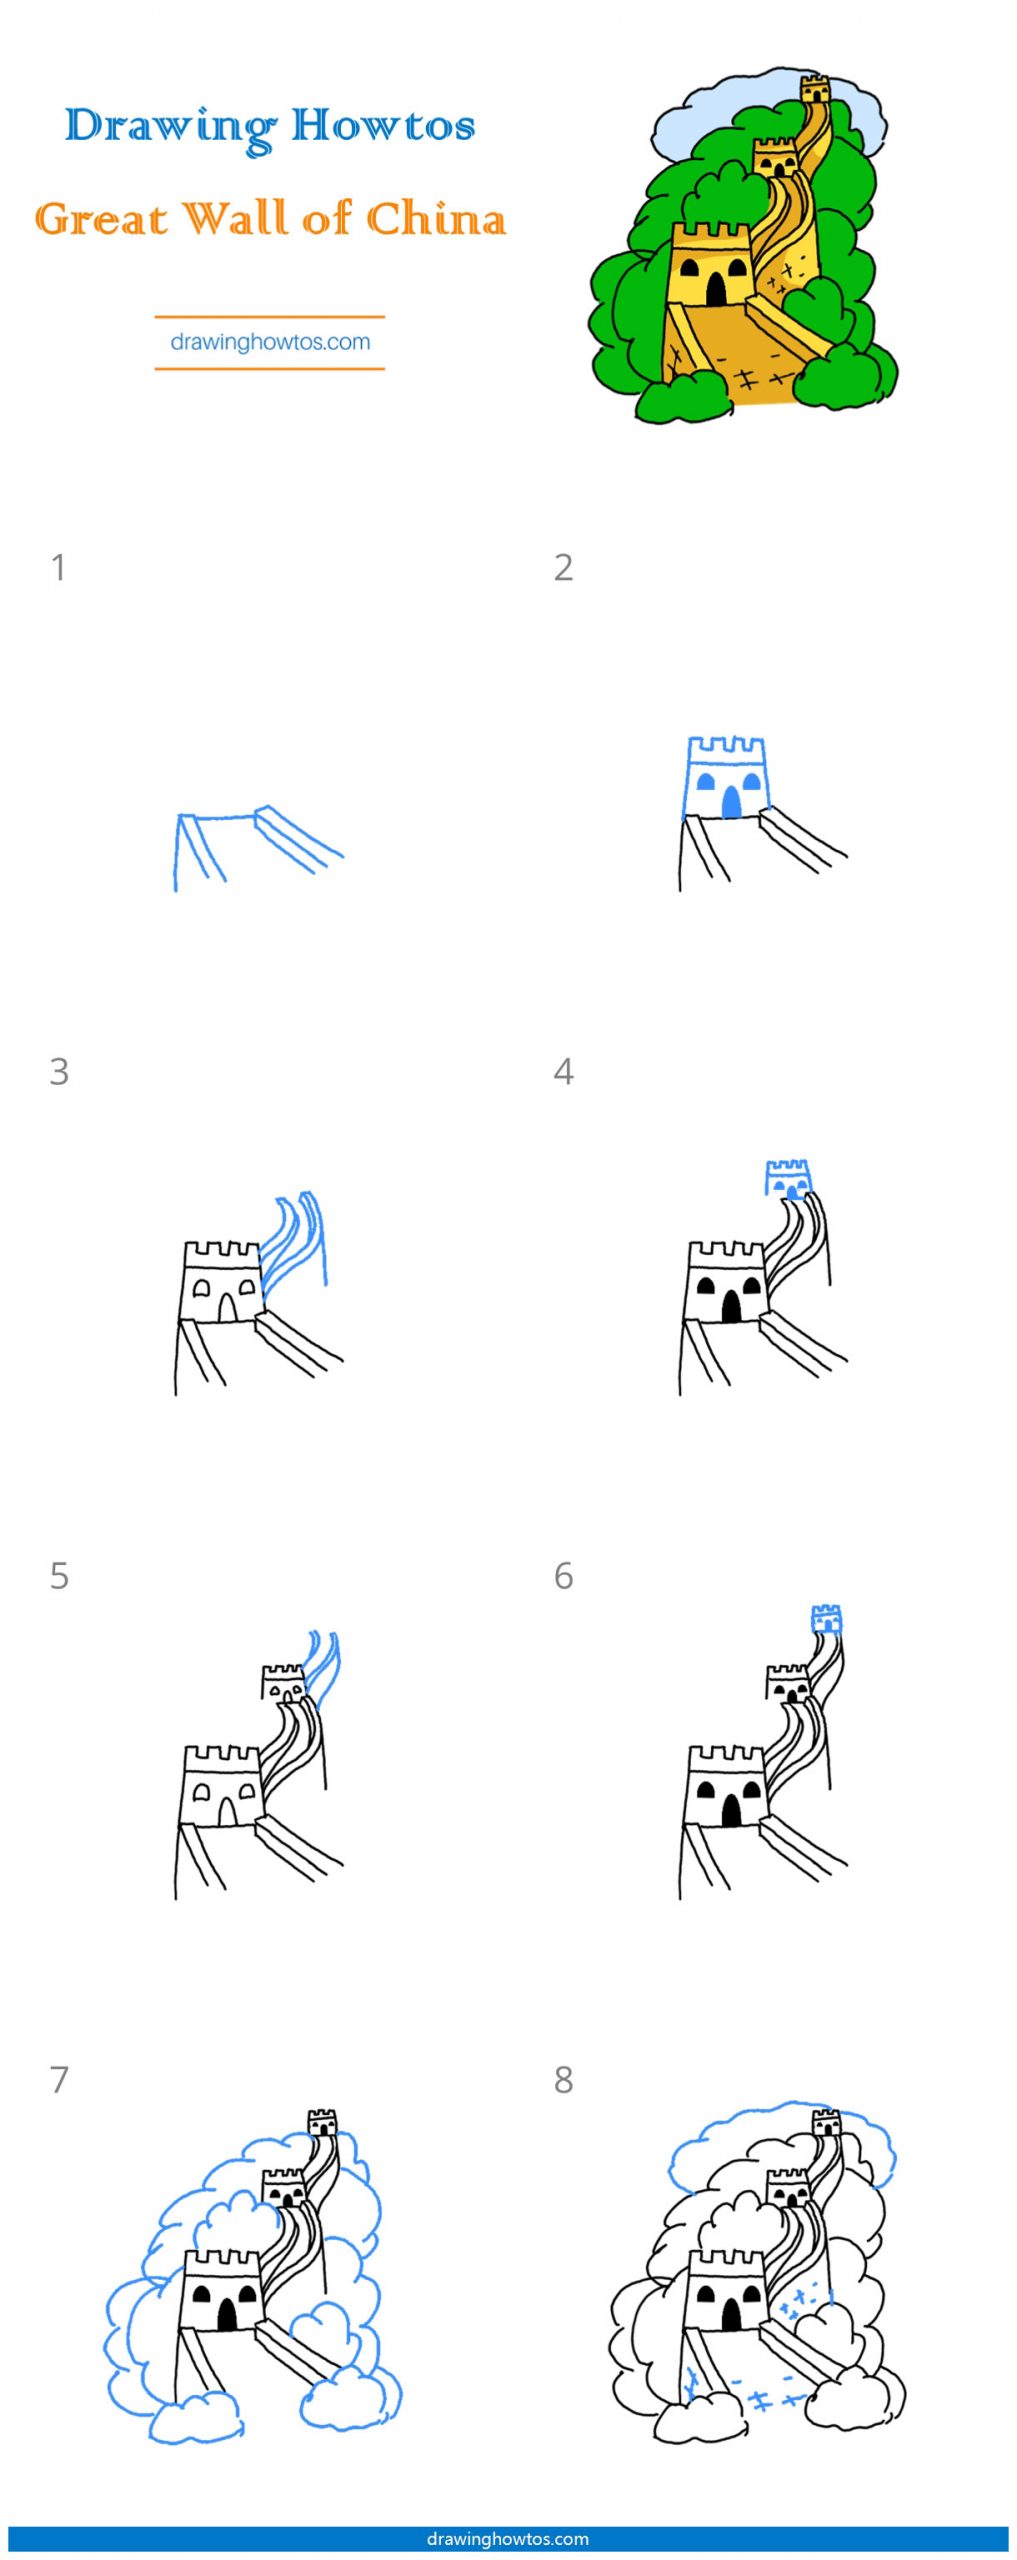 How to Draw the Great Wall Of China Step by Step